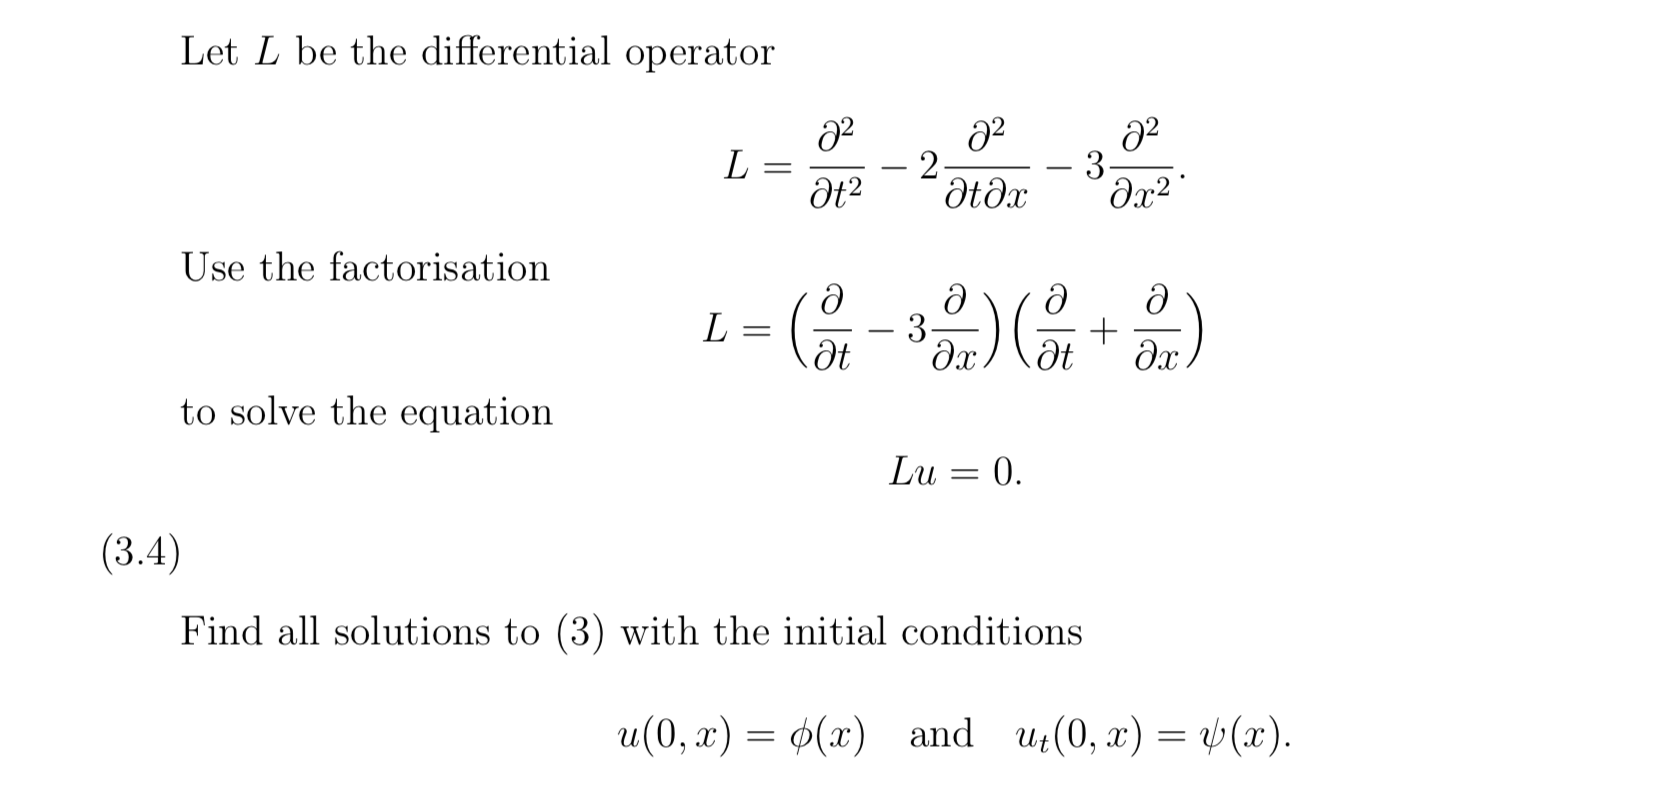 Let L be the differential operator
L =
2
3-
Ətəx
Use the factorisation
L =
3-
Ət
+
-
to solve the equation
Lu
0.
4)
Find all solutions to (3) with the initial conditions
и (0, а) — Ф(х) and u(0, z) %3D (х).
